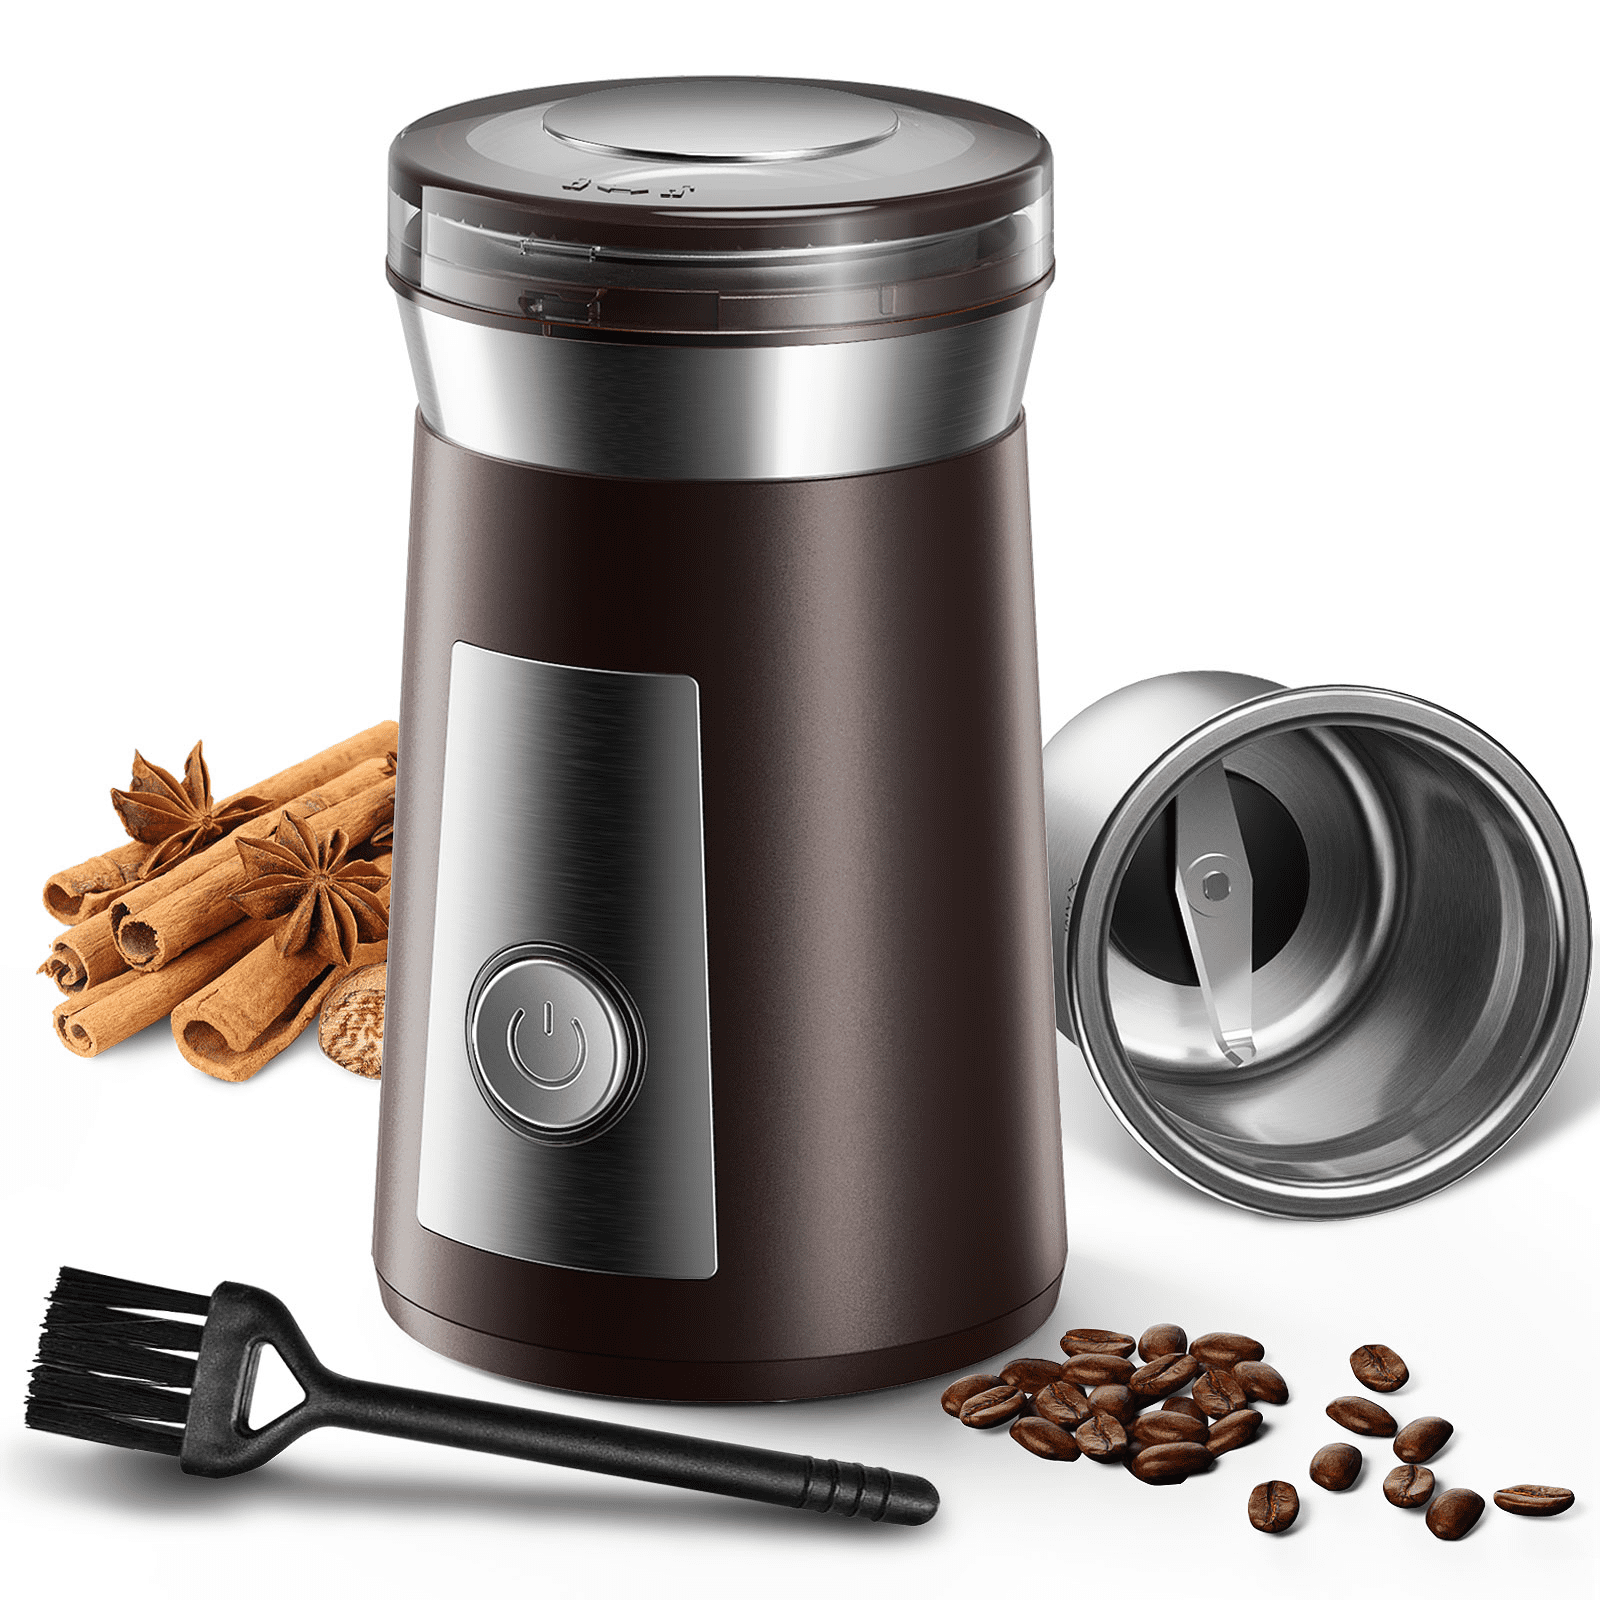 Grain Grinder for Dry or Wet Grinding for Home Kitchen Coffee Beans Coffee Grinder Electric,Multifunctional Spice Grinder,Removable Stainless Steel Bowl